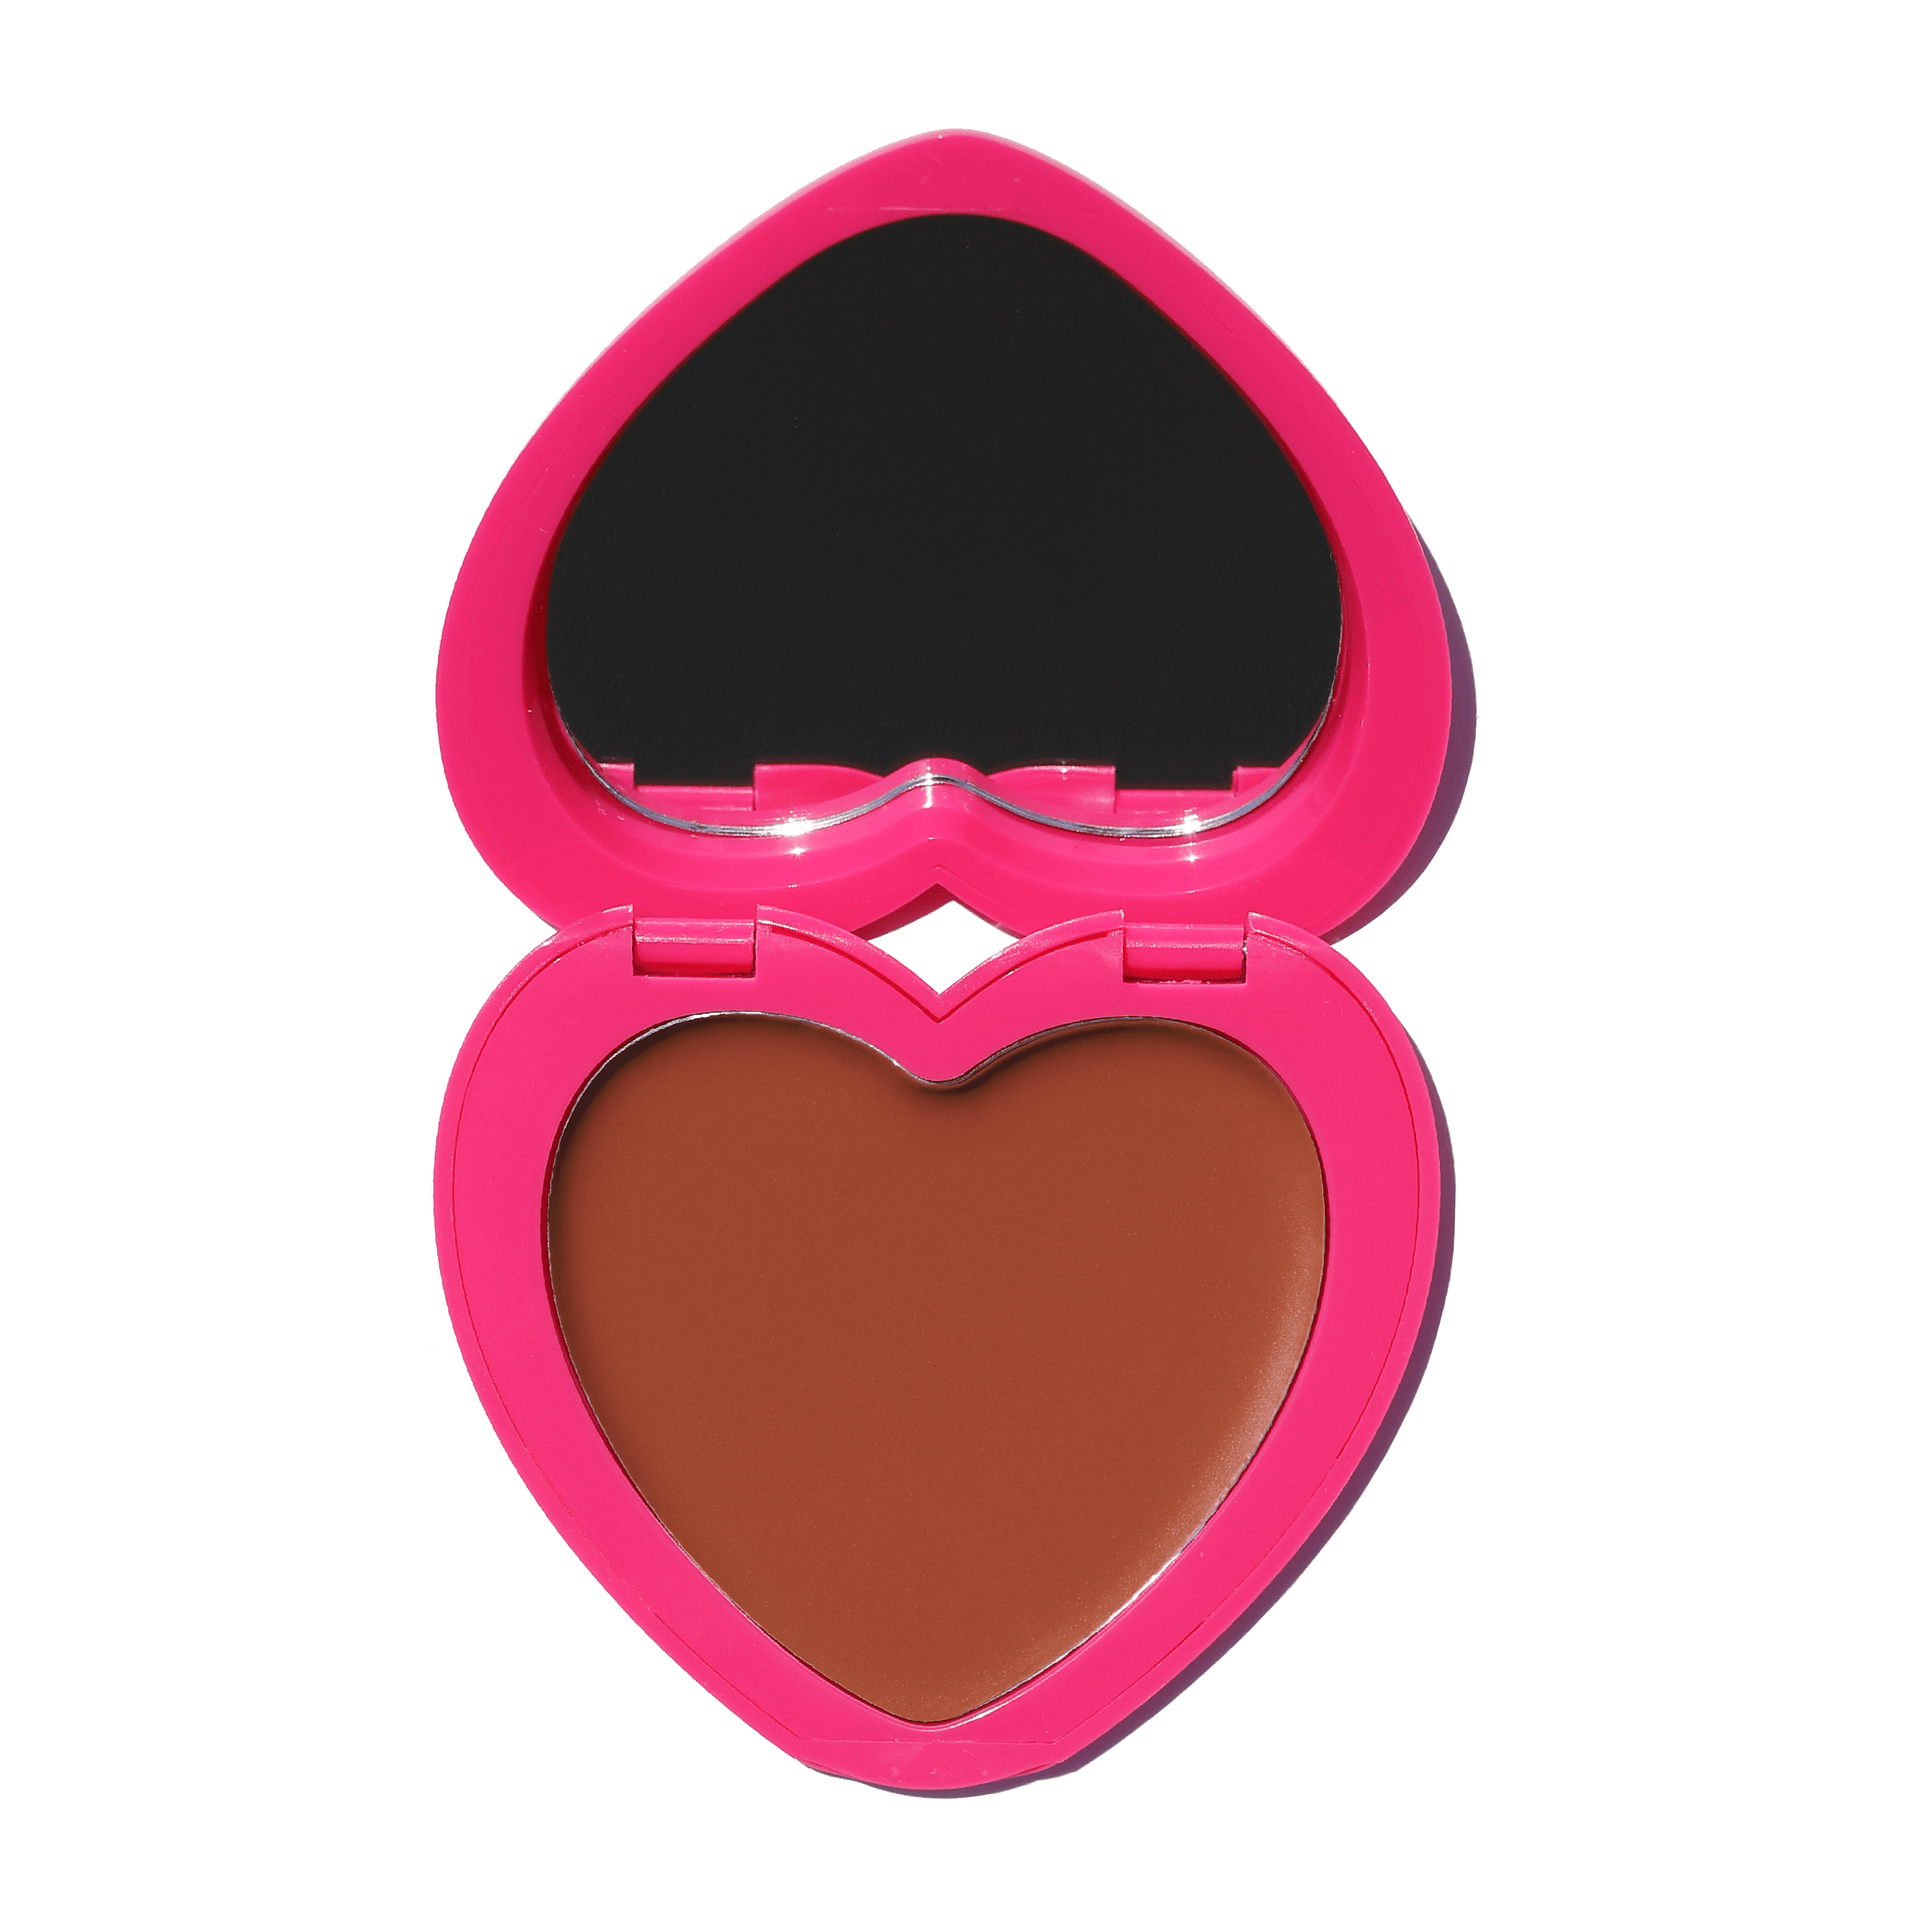 Heart-shaped compact of Candy Paint Cheek + Lip Tint opened to reveal a rich, terracotta cream blush with built-in mirror, perfect for achieving a dewy, radiant finish.